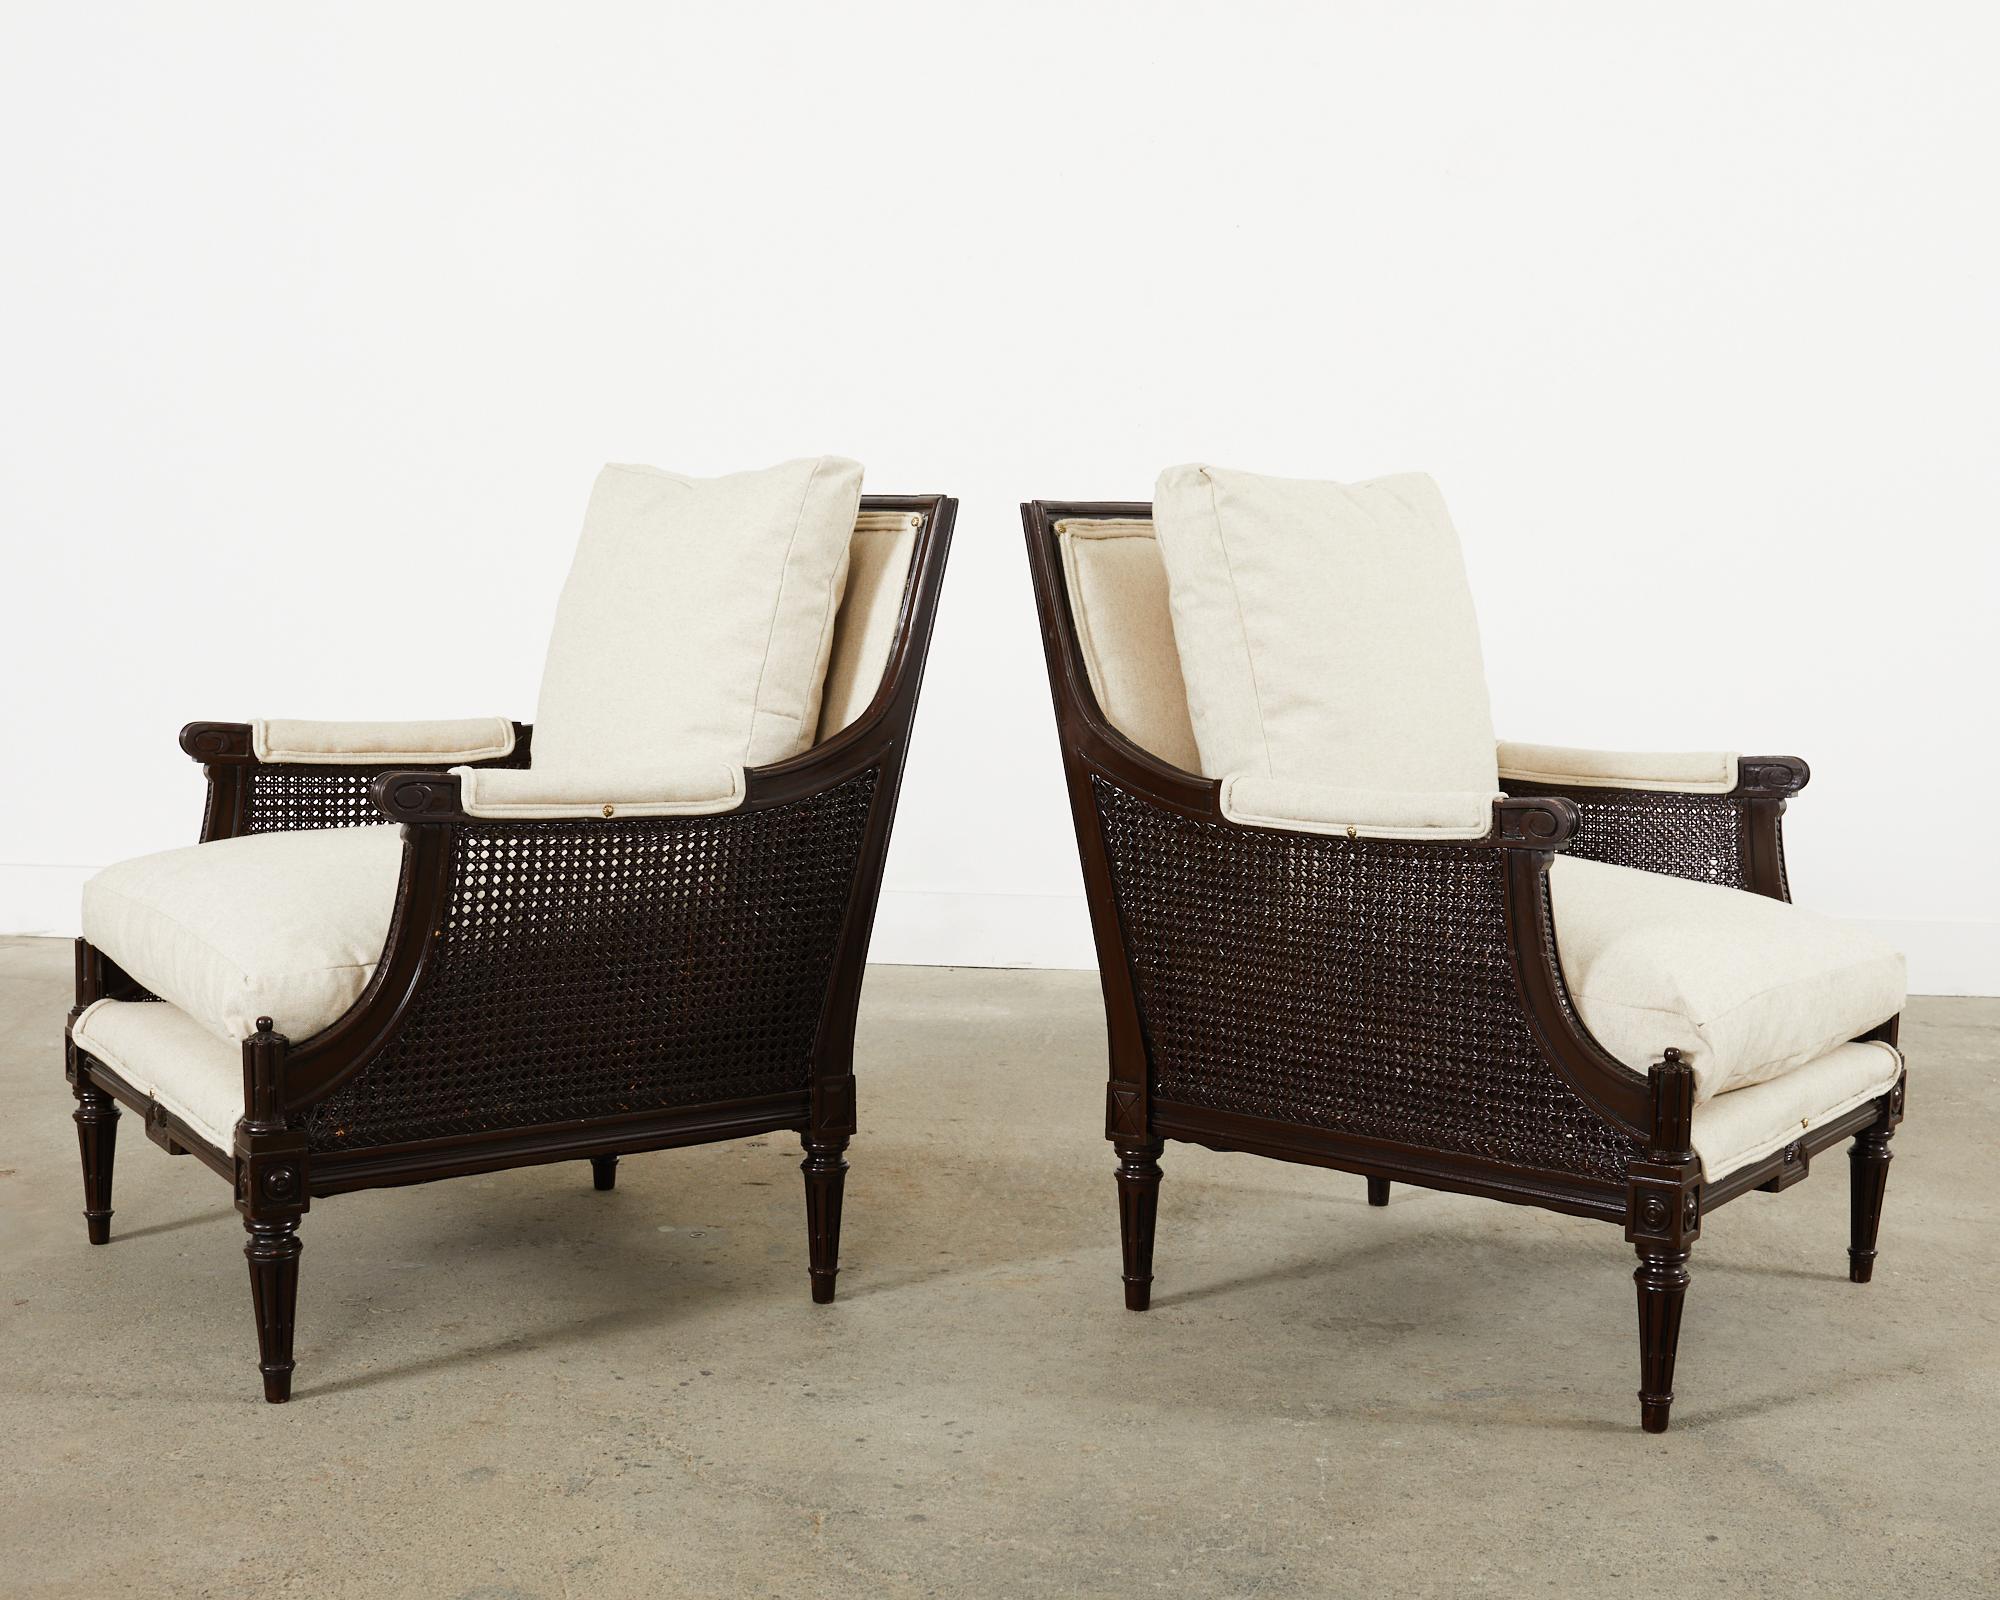 20th Century Pair of Neoclassical Louis XVI Style Caned Bergere Lounge Chairs